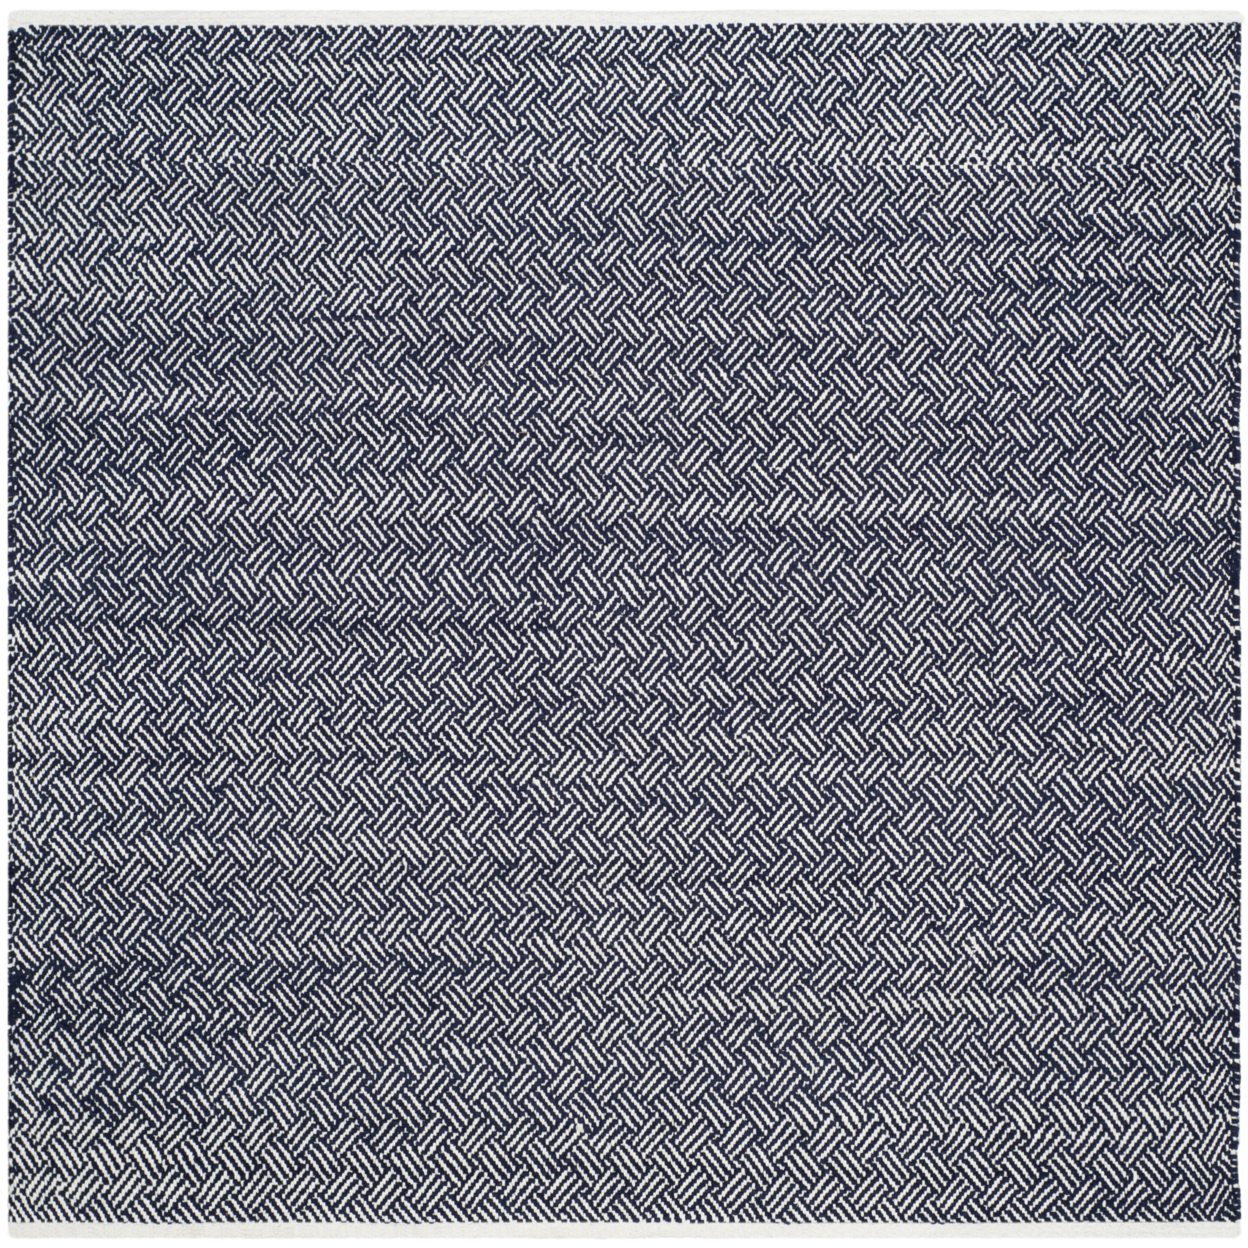 SAFAVIEH Boston Collection BOS680D Handwoven Navy Rug - 6' Square